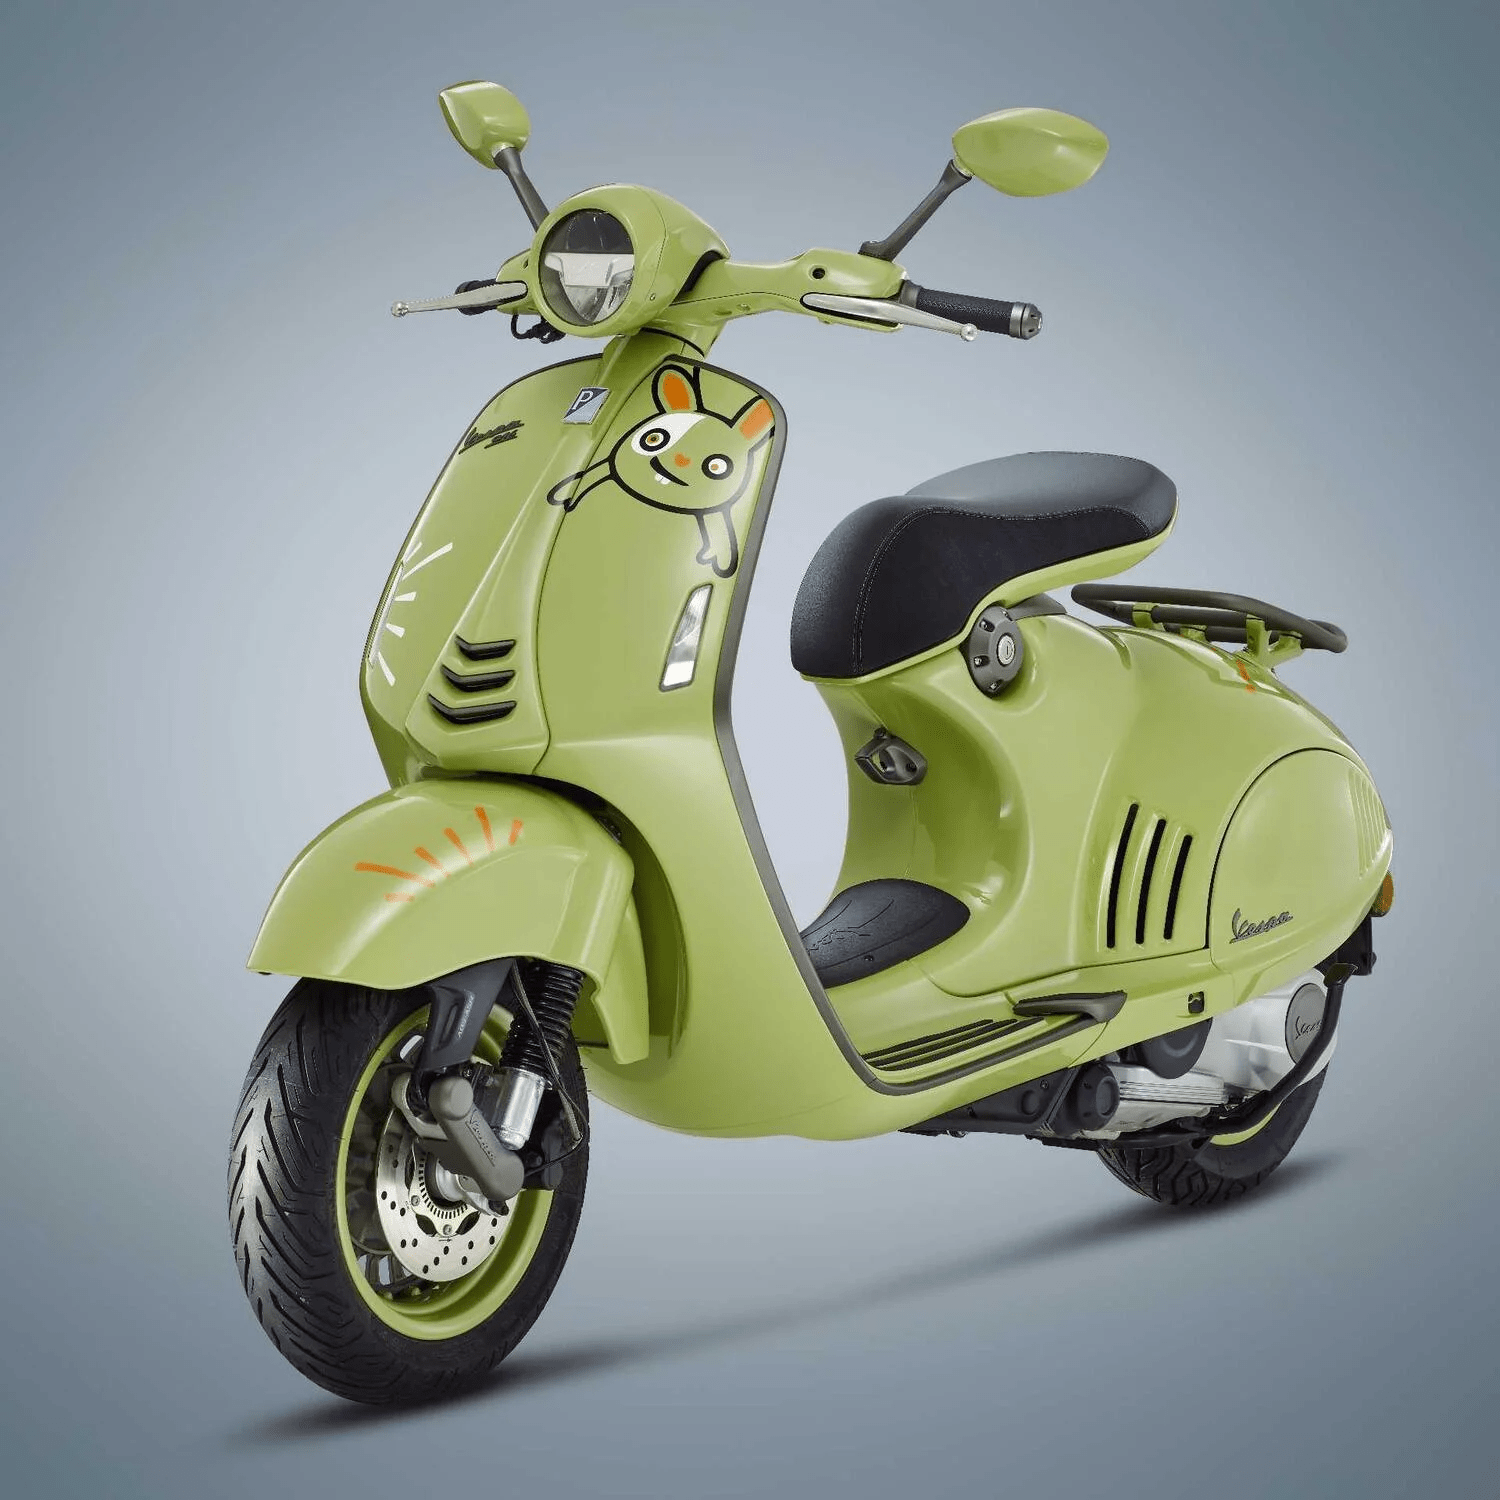 [Street] Vespa 946, a special edition inspired by the lunar horoscope